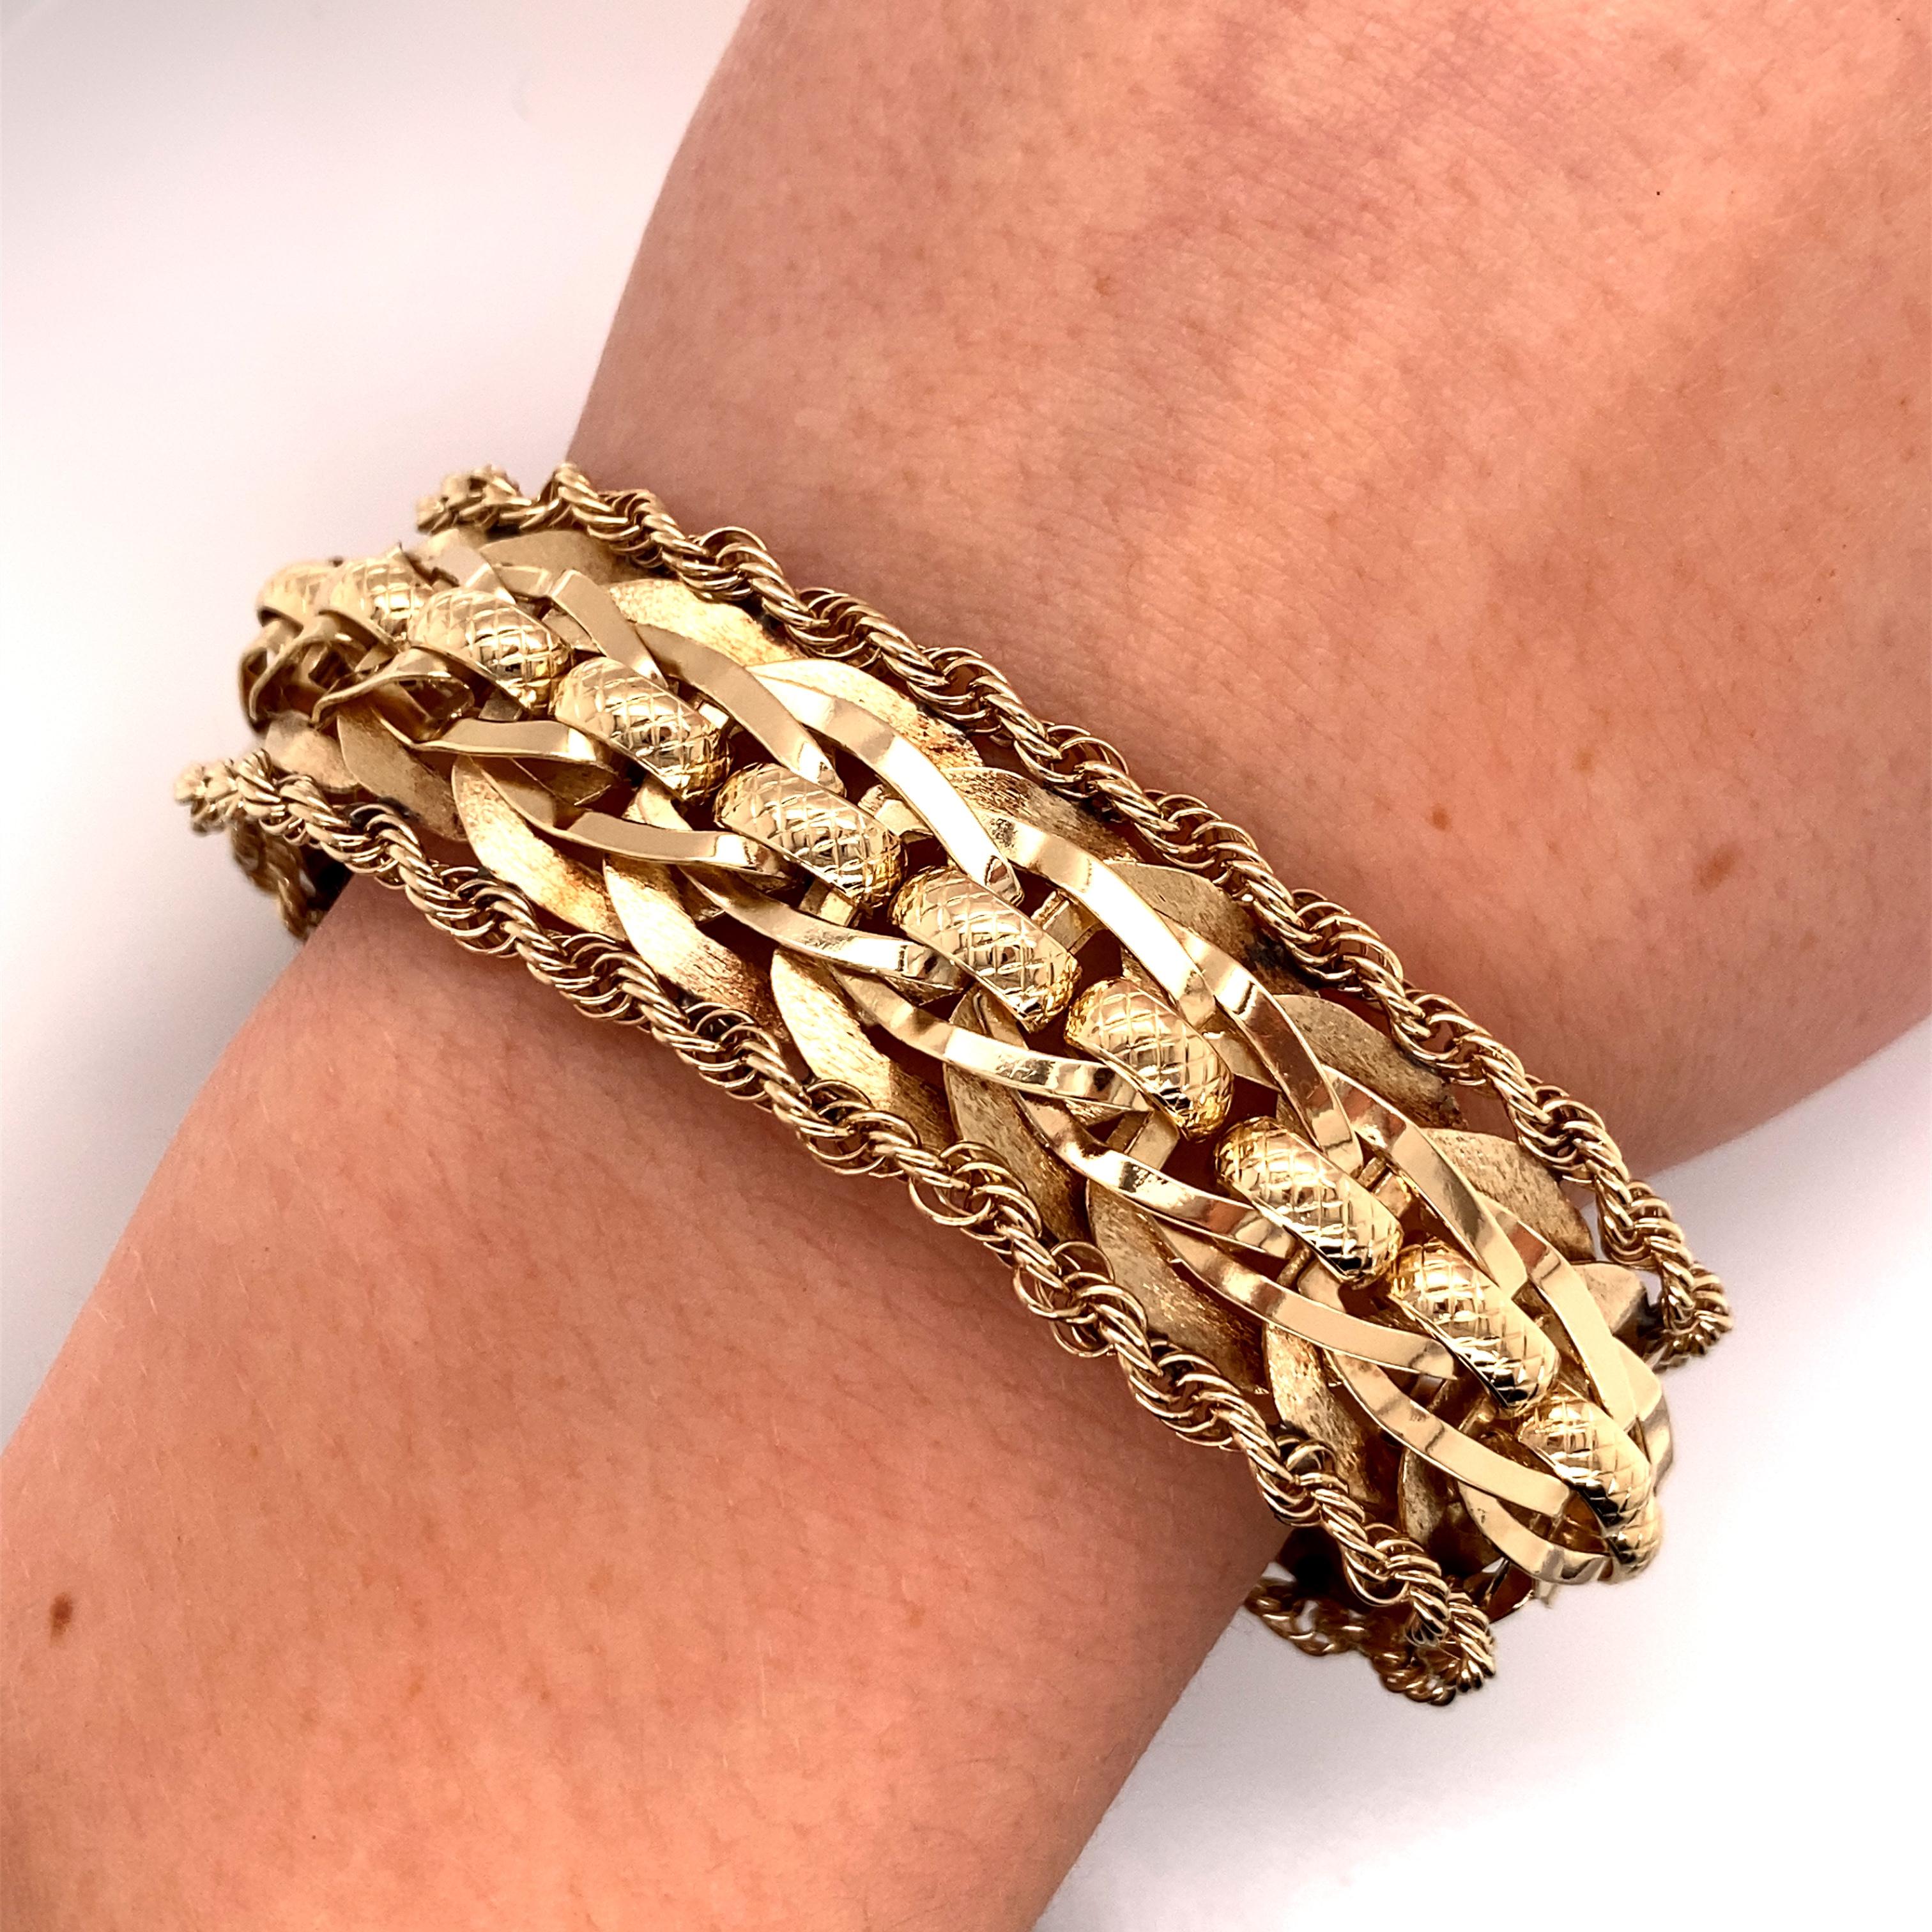 Vintage 1960s 14 Karat Yellow Gold Wide Link Bracelet with Rope Edge - The bracelet measure 7.15 inches long and 3/4 inch wide and features a hidden clasp with a figure 8 safety. The bracelet weighs 39 grams.